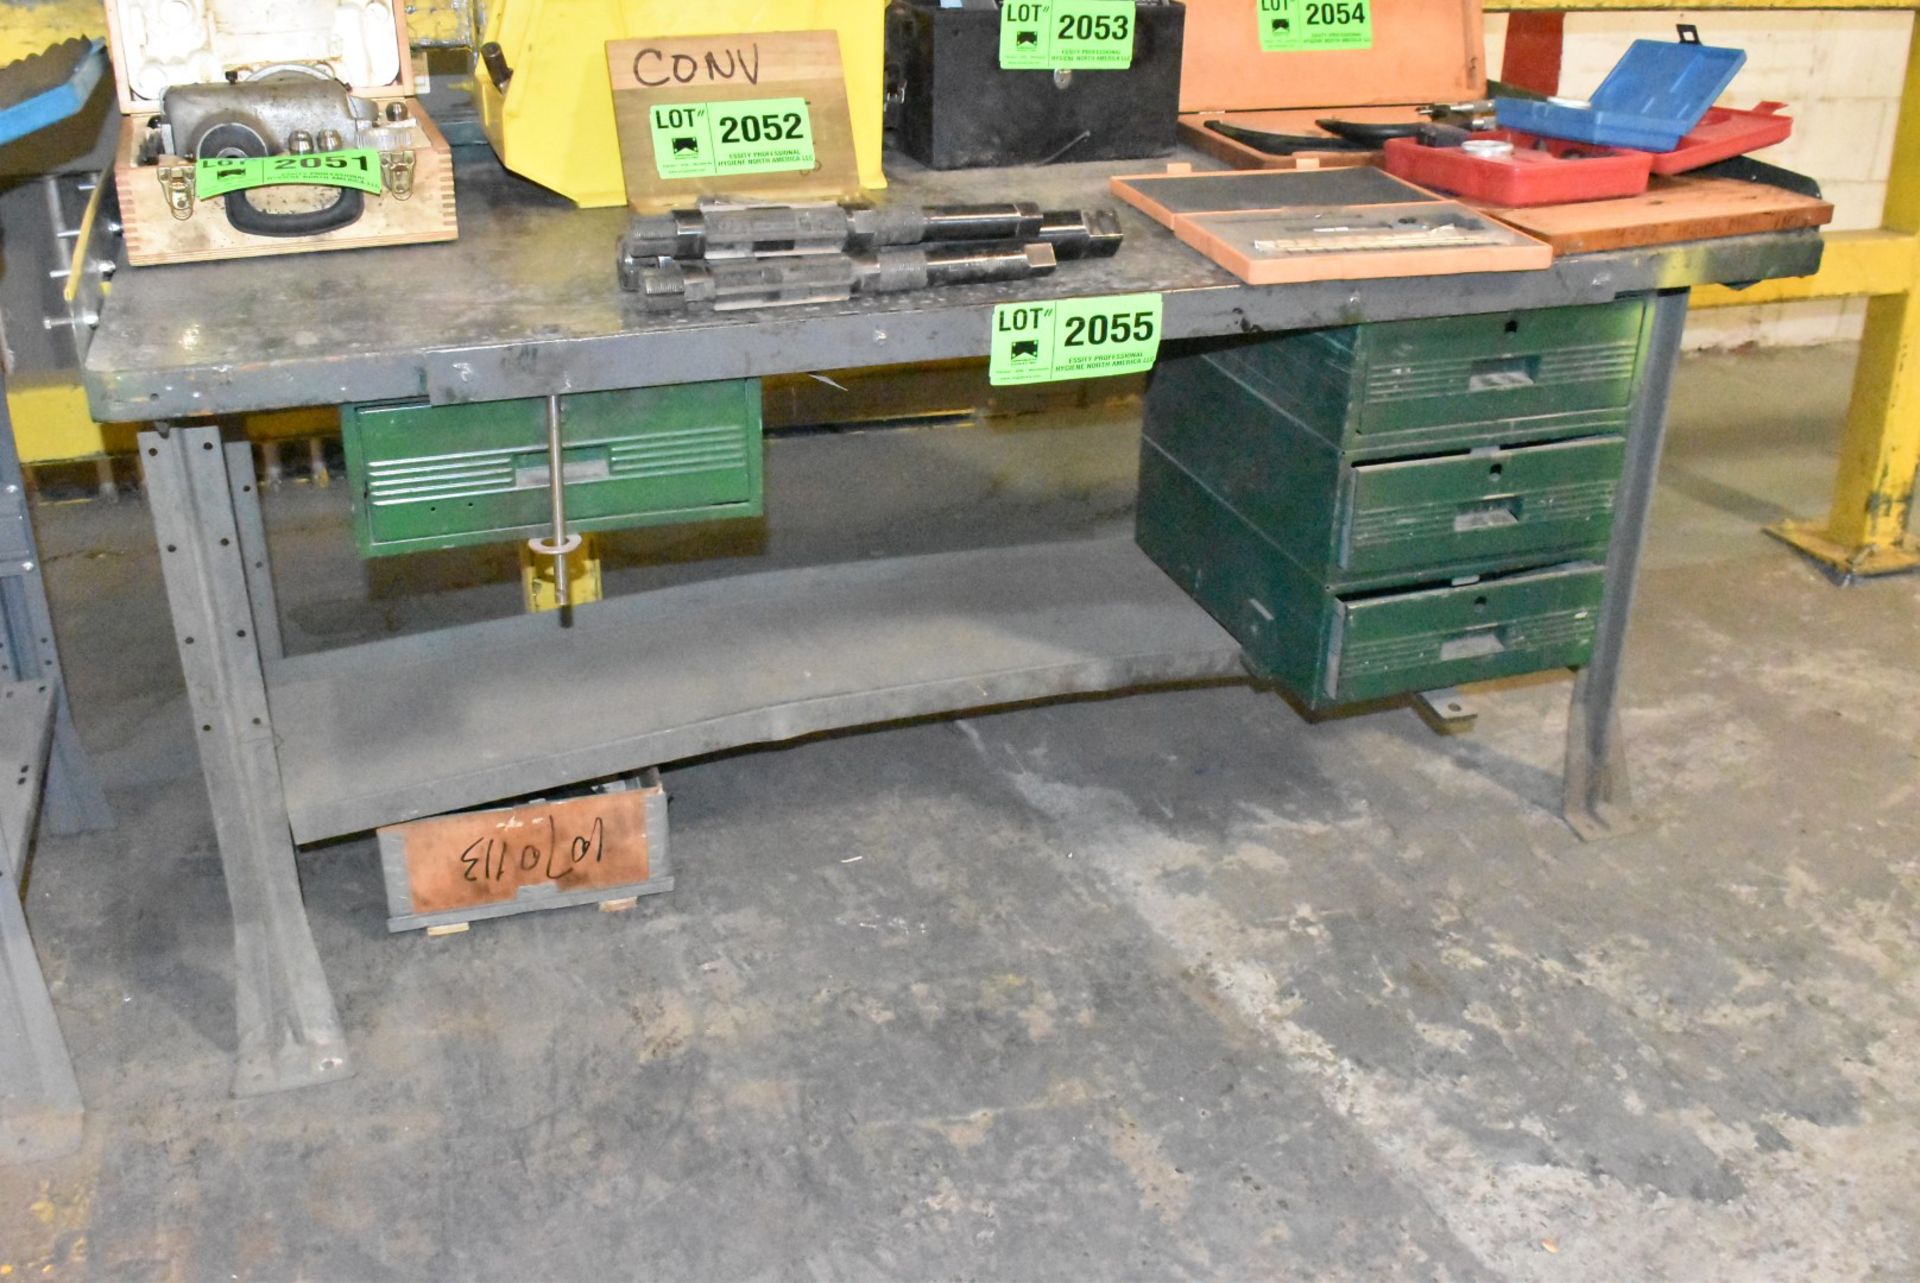 SHOP TABLE [RIGGING FEES FOR LOT #2055 - $50 USD PLUS APPLICABLE TAXES]